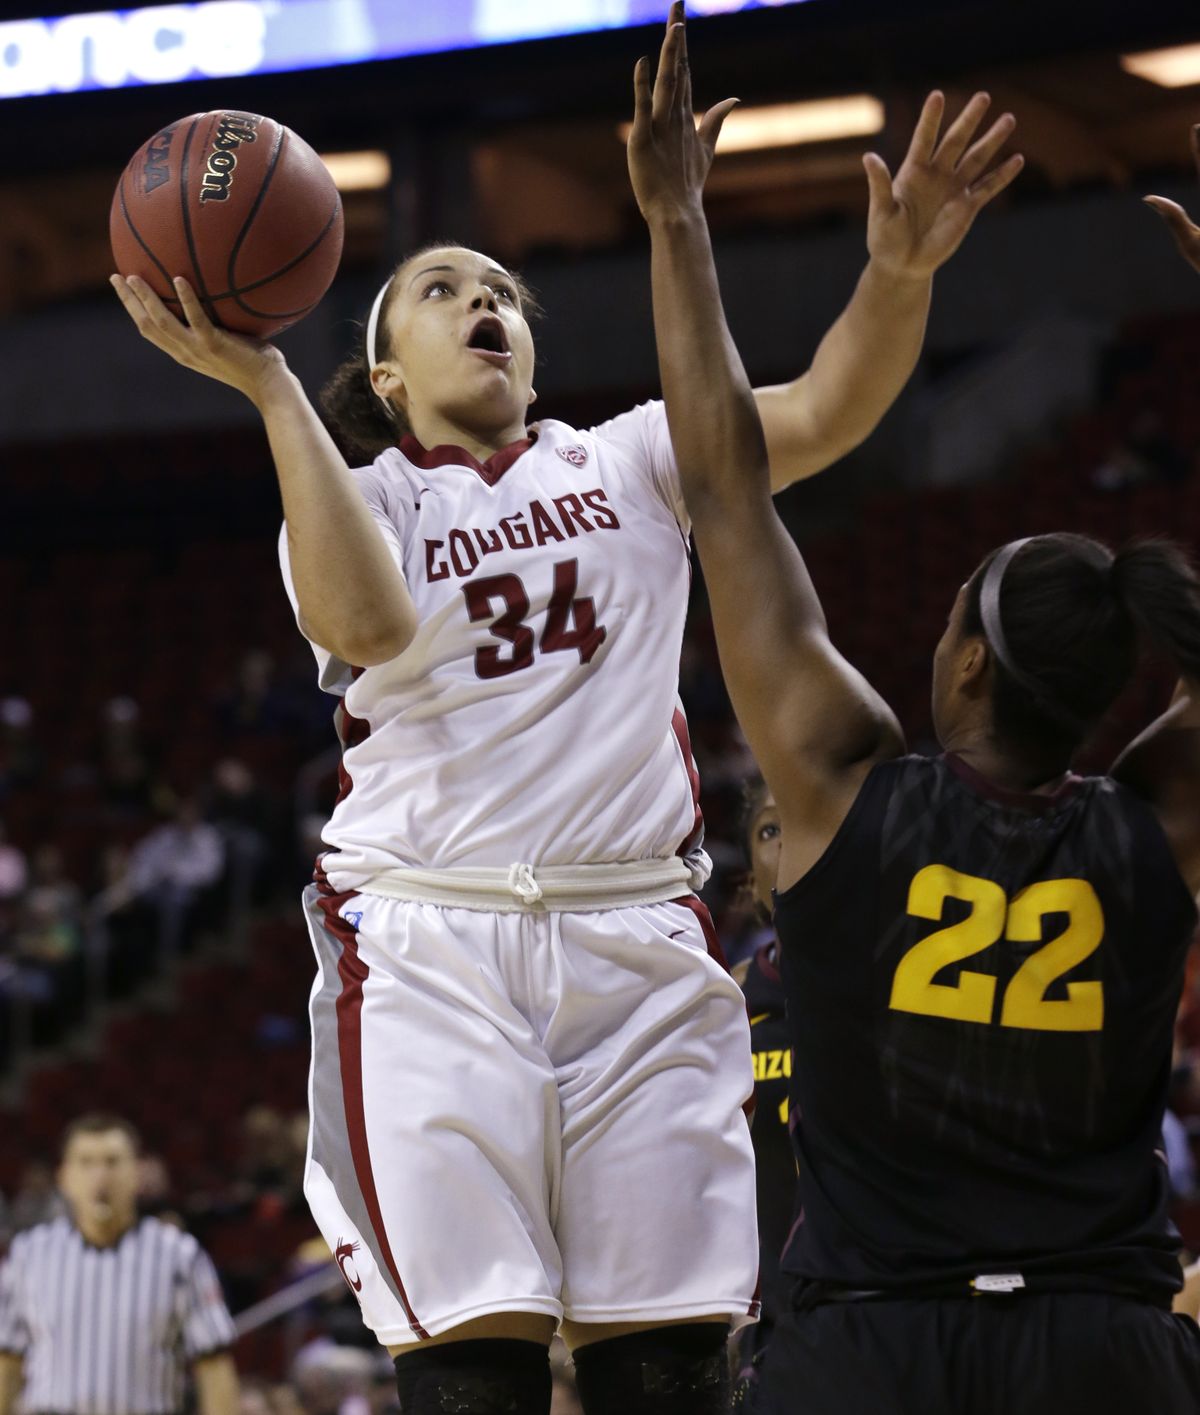 WSU’s Mariah Cooks came off the bench to score key baskets. (Associated Press)